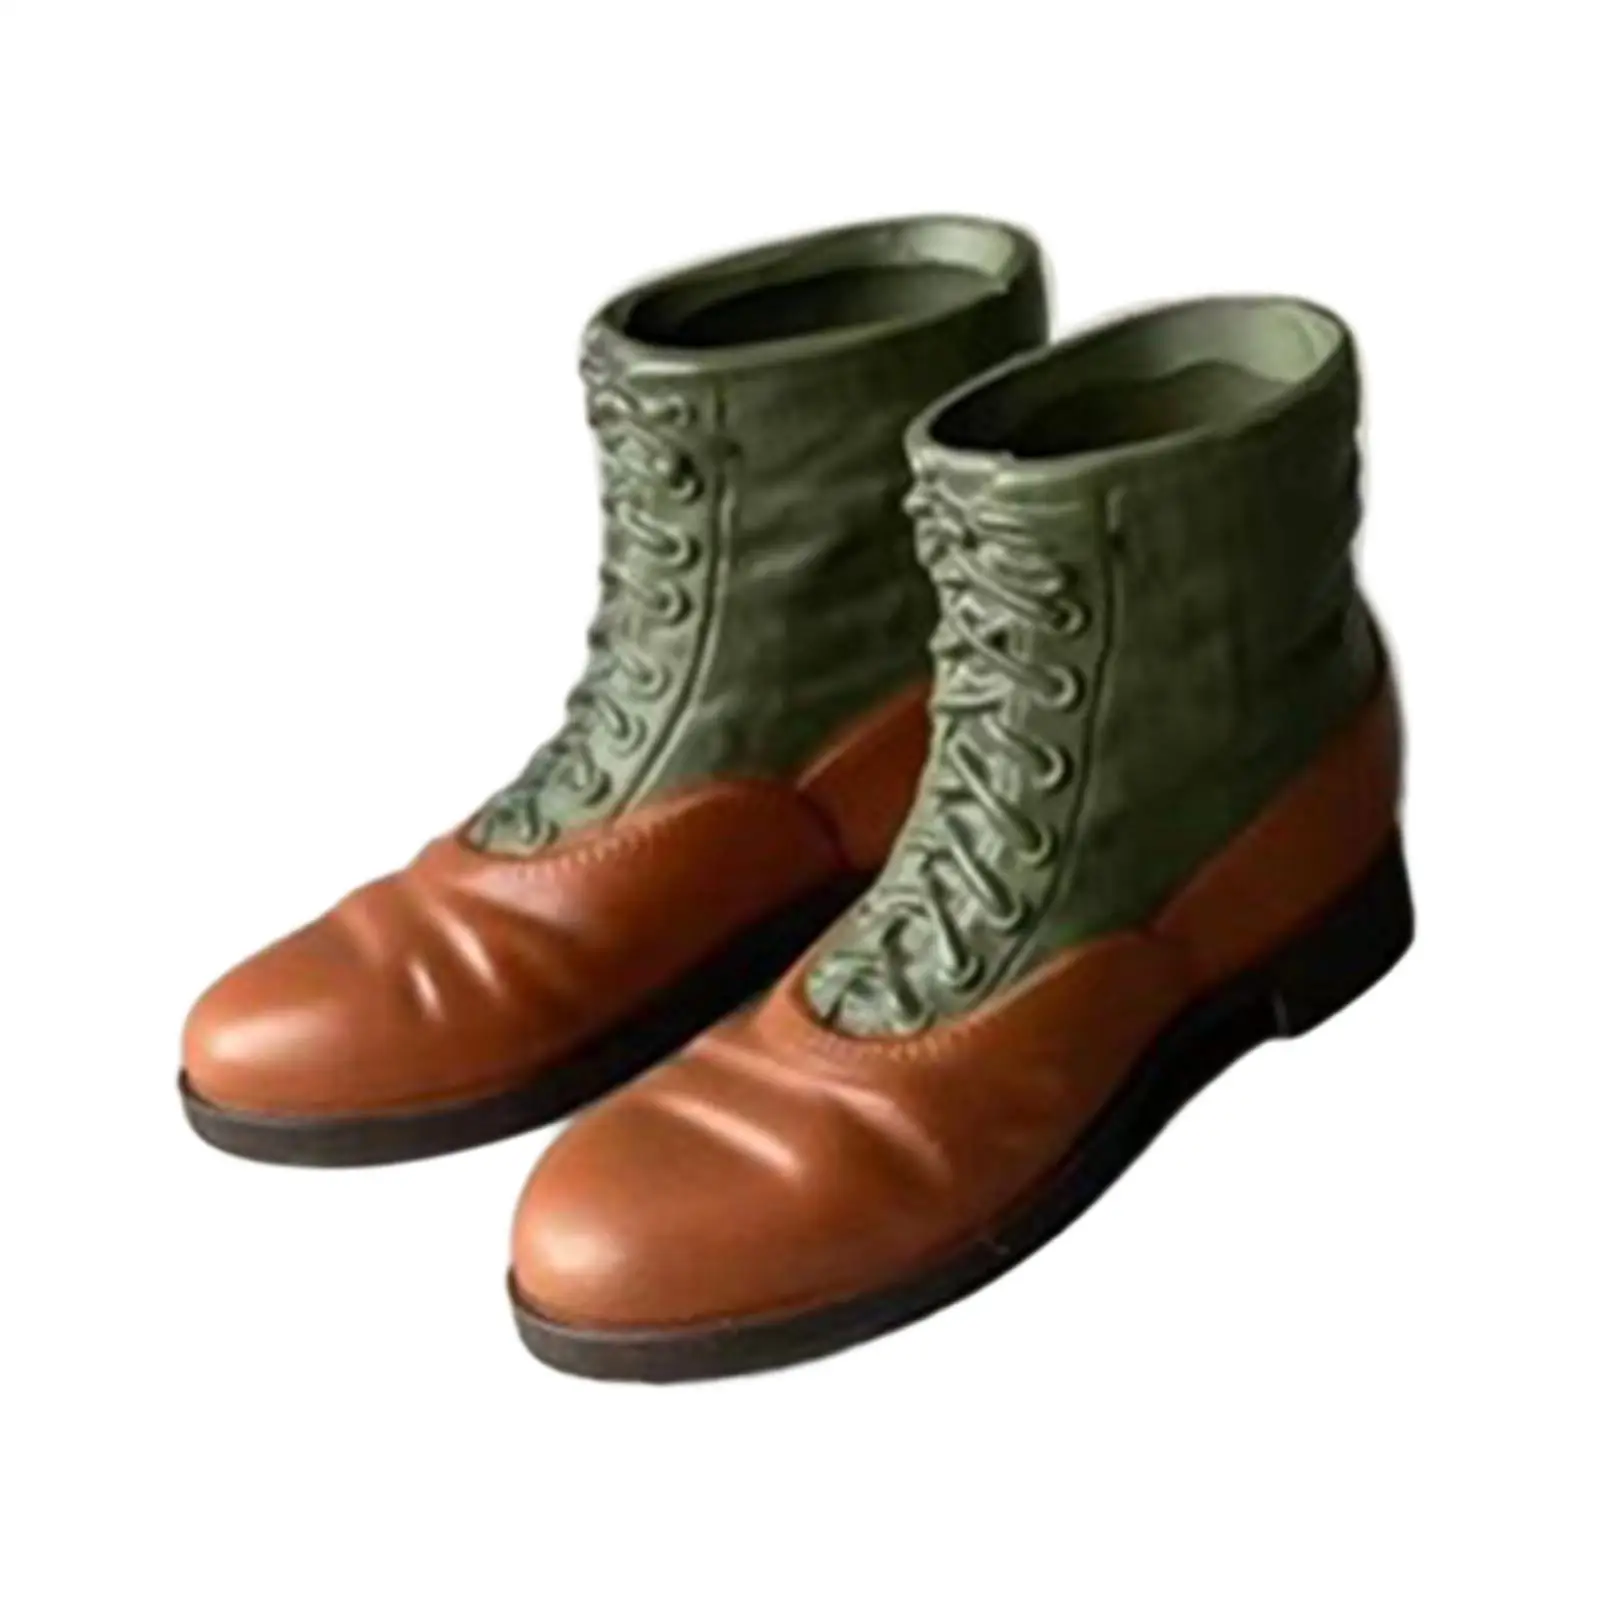 Action Figures Shoes Leather Boots Handmade Educational Toy 1/6 Scale Boots